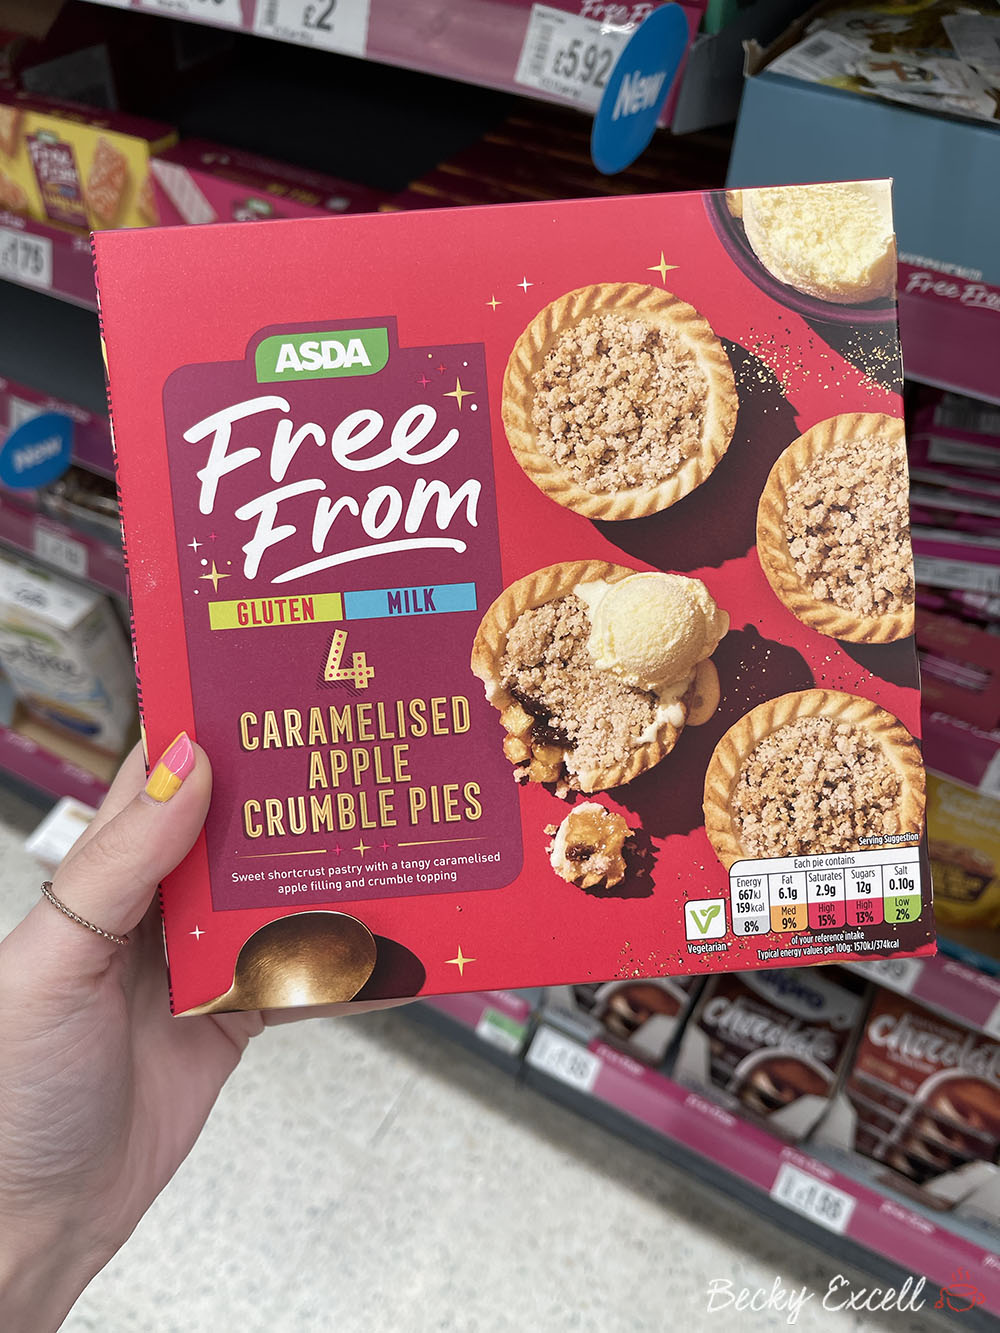 Asda's gluten-free Christmas products 2021: 5 Caramelised Apple Crumble Pies